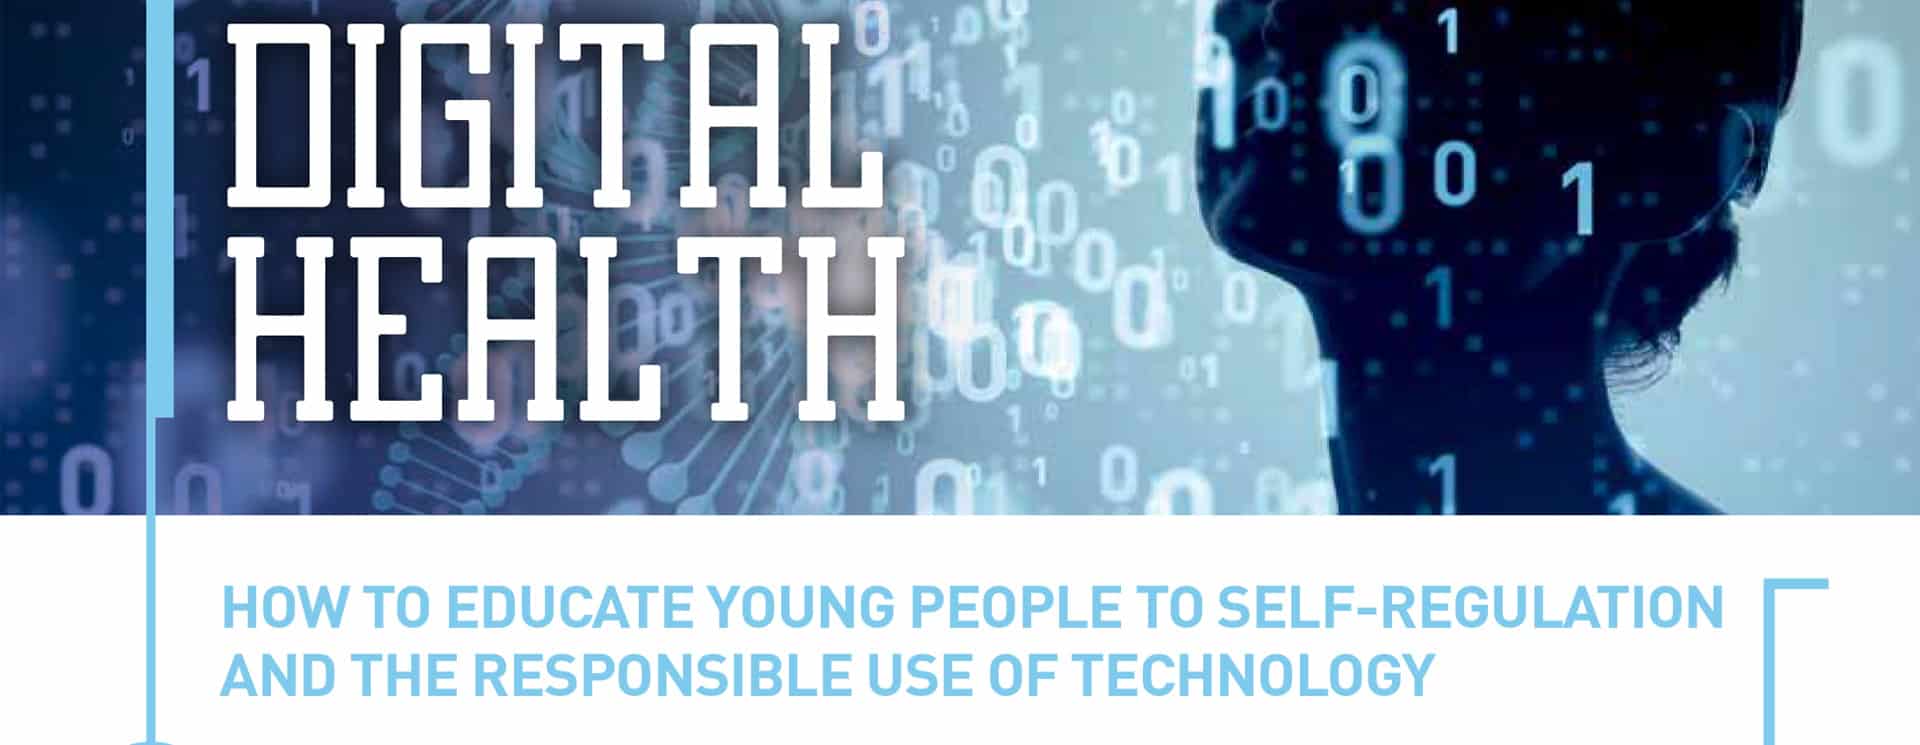 Digital Health: How To Educate Young People to Self-Regulation and the responsible use of Technology